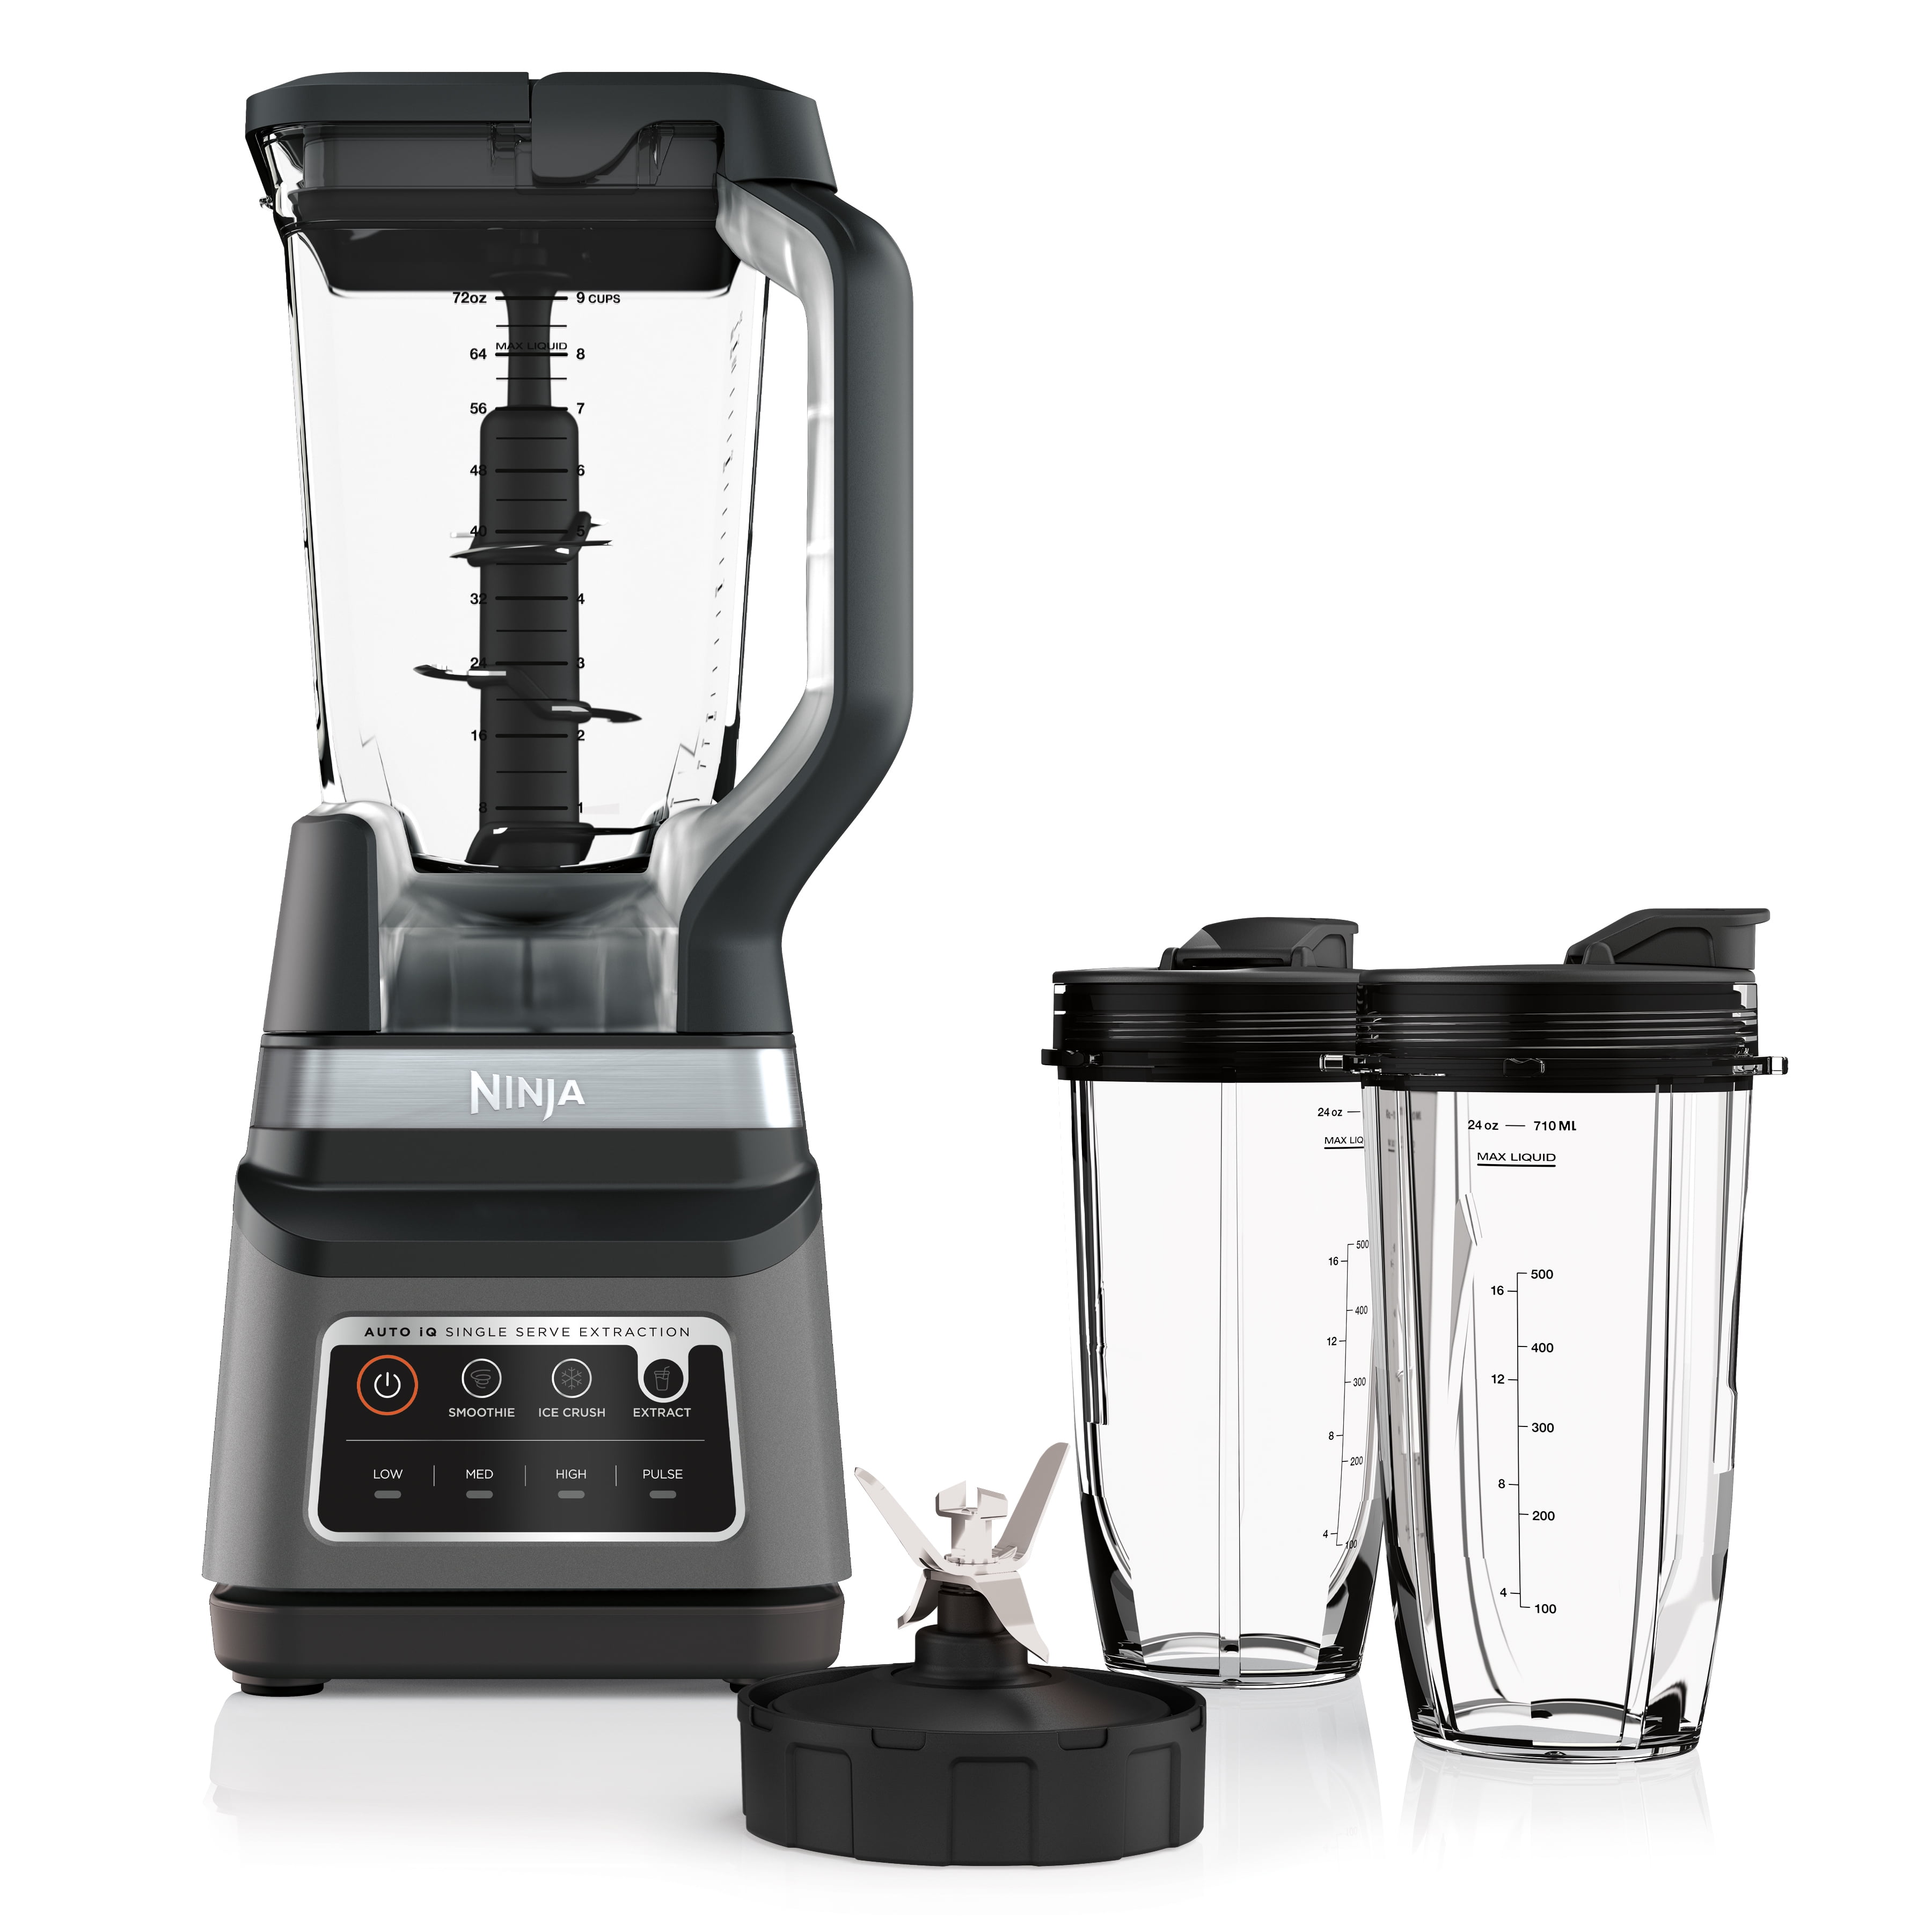 NINJA PROFESSIONAL PLUS BLENDER DUO IN BOX - Earl's Auction Company